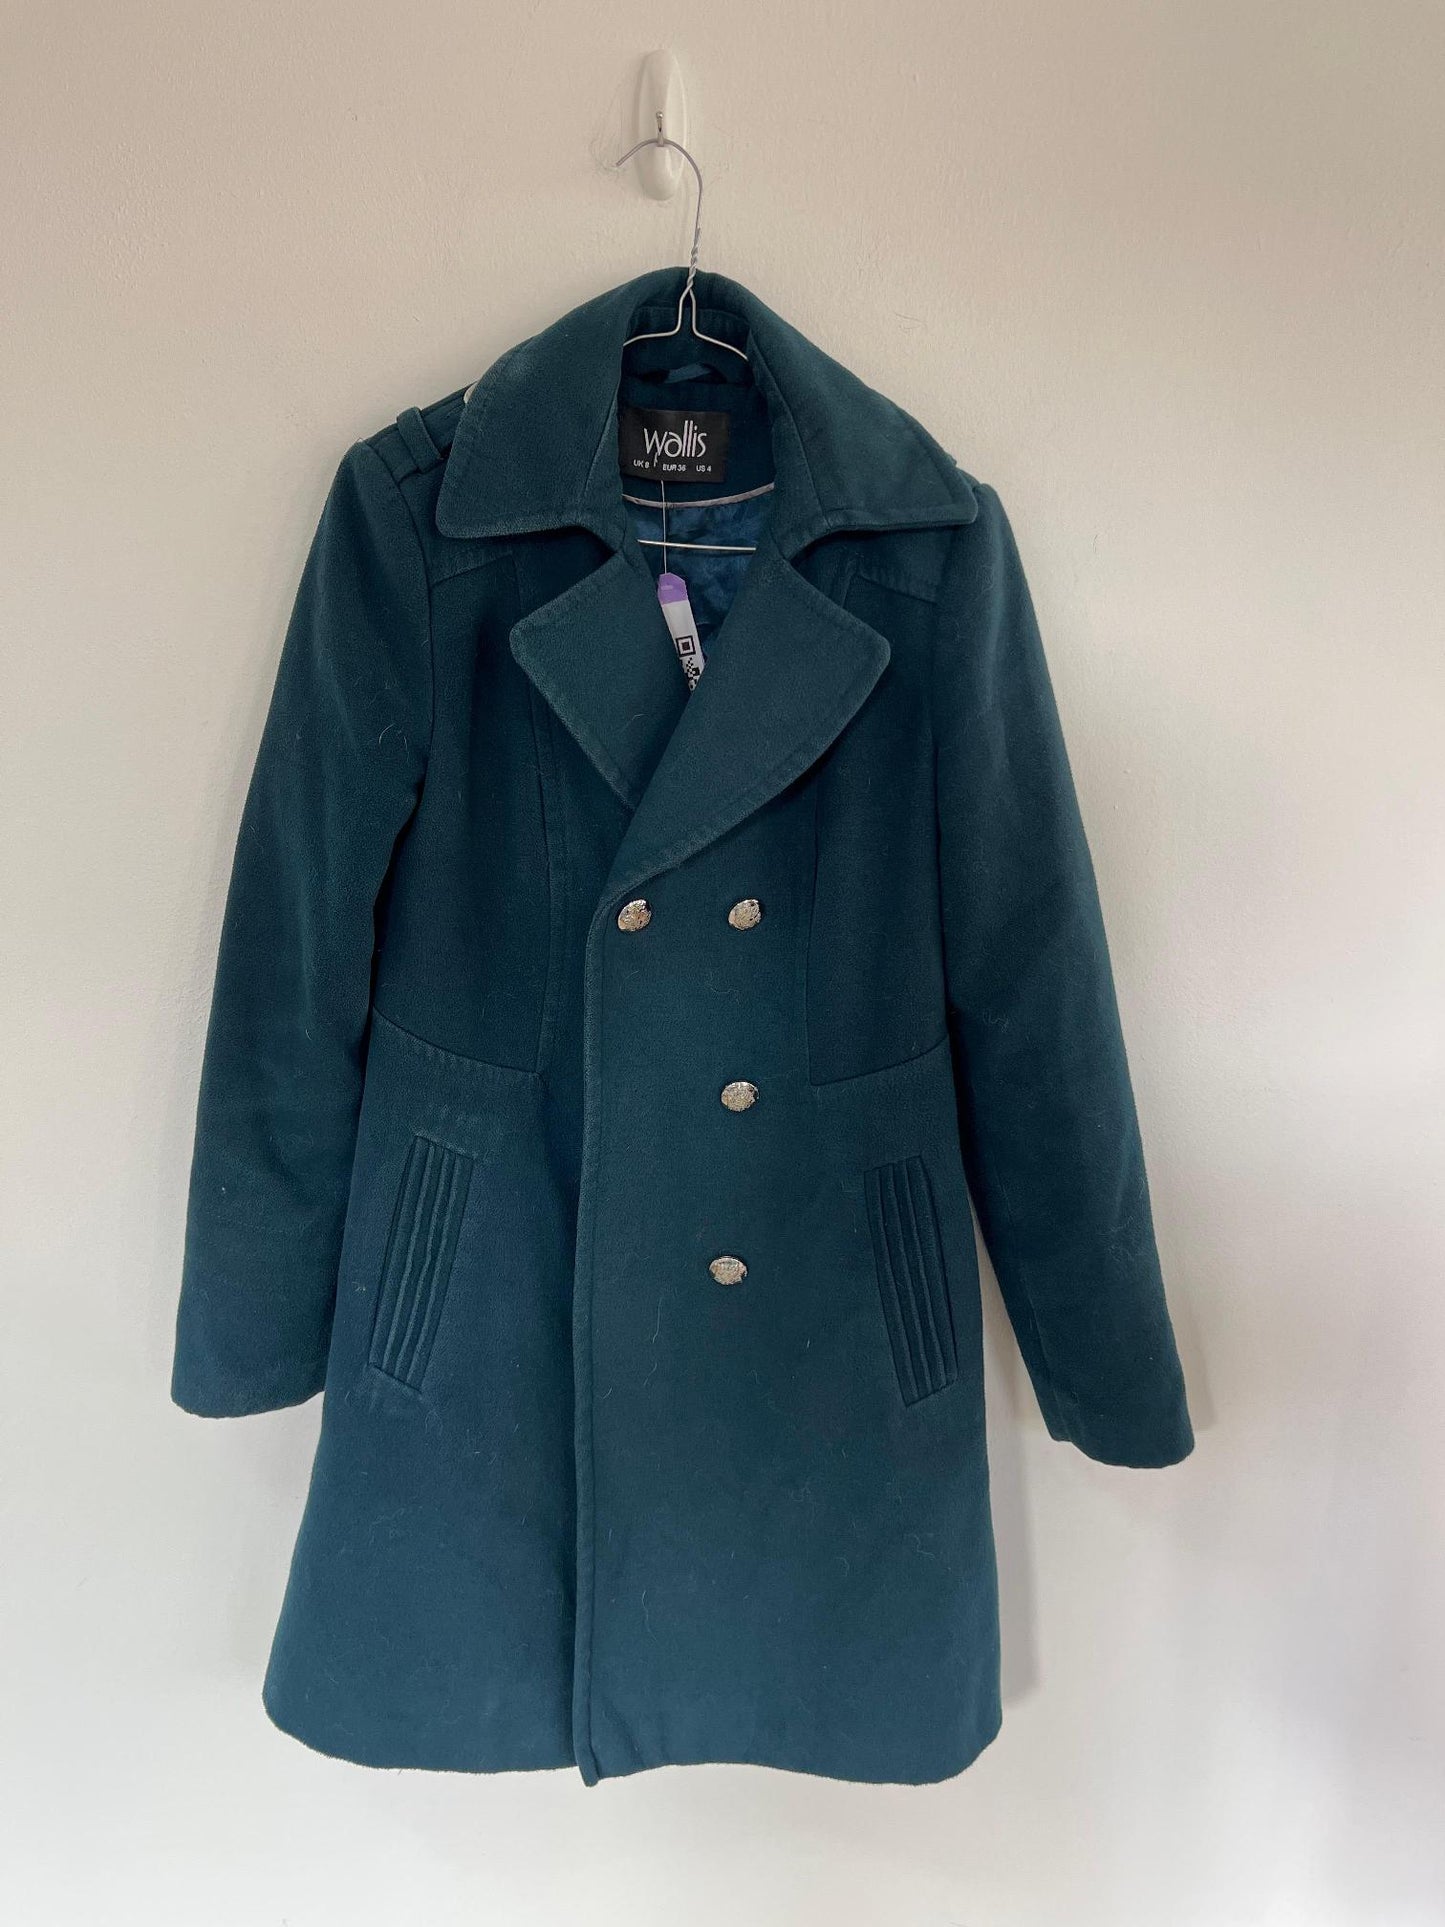 Teal double breasted coat, Wallis, Size 8 - Damaged Item Sale